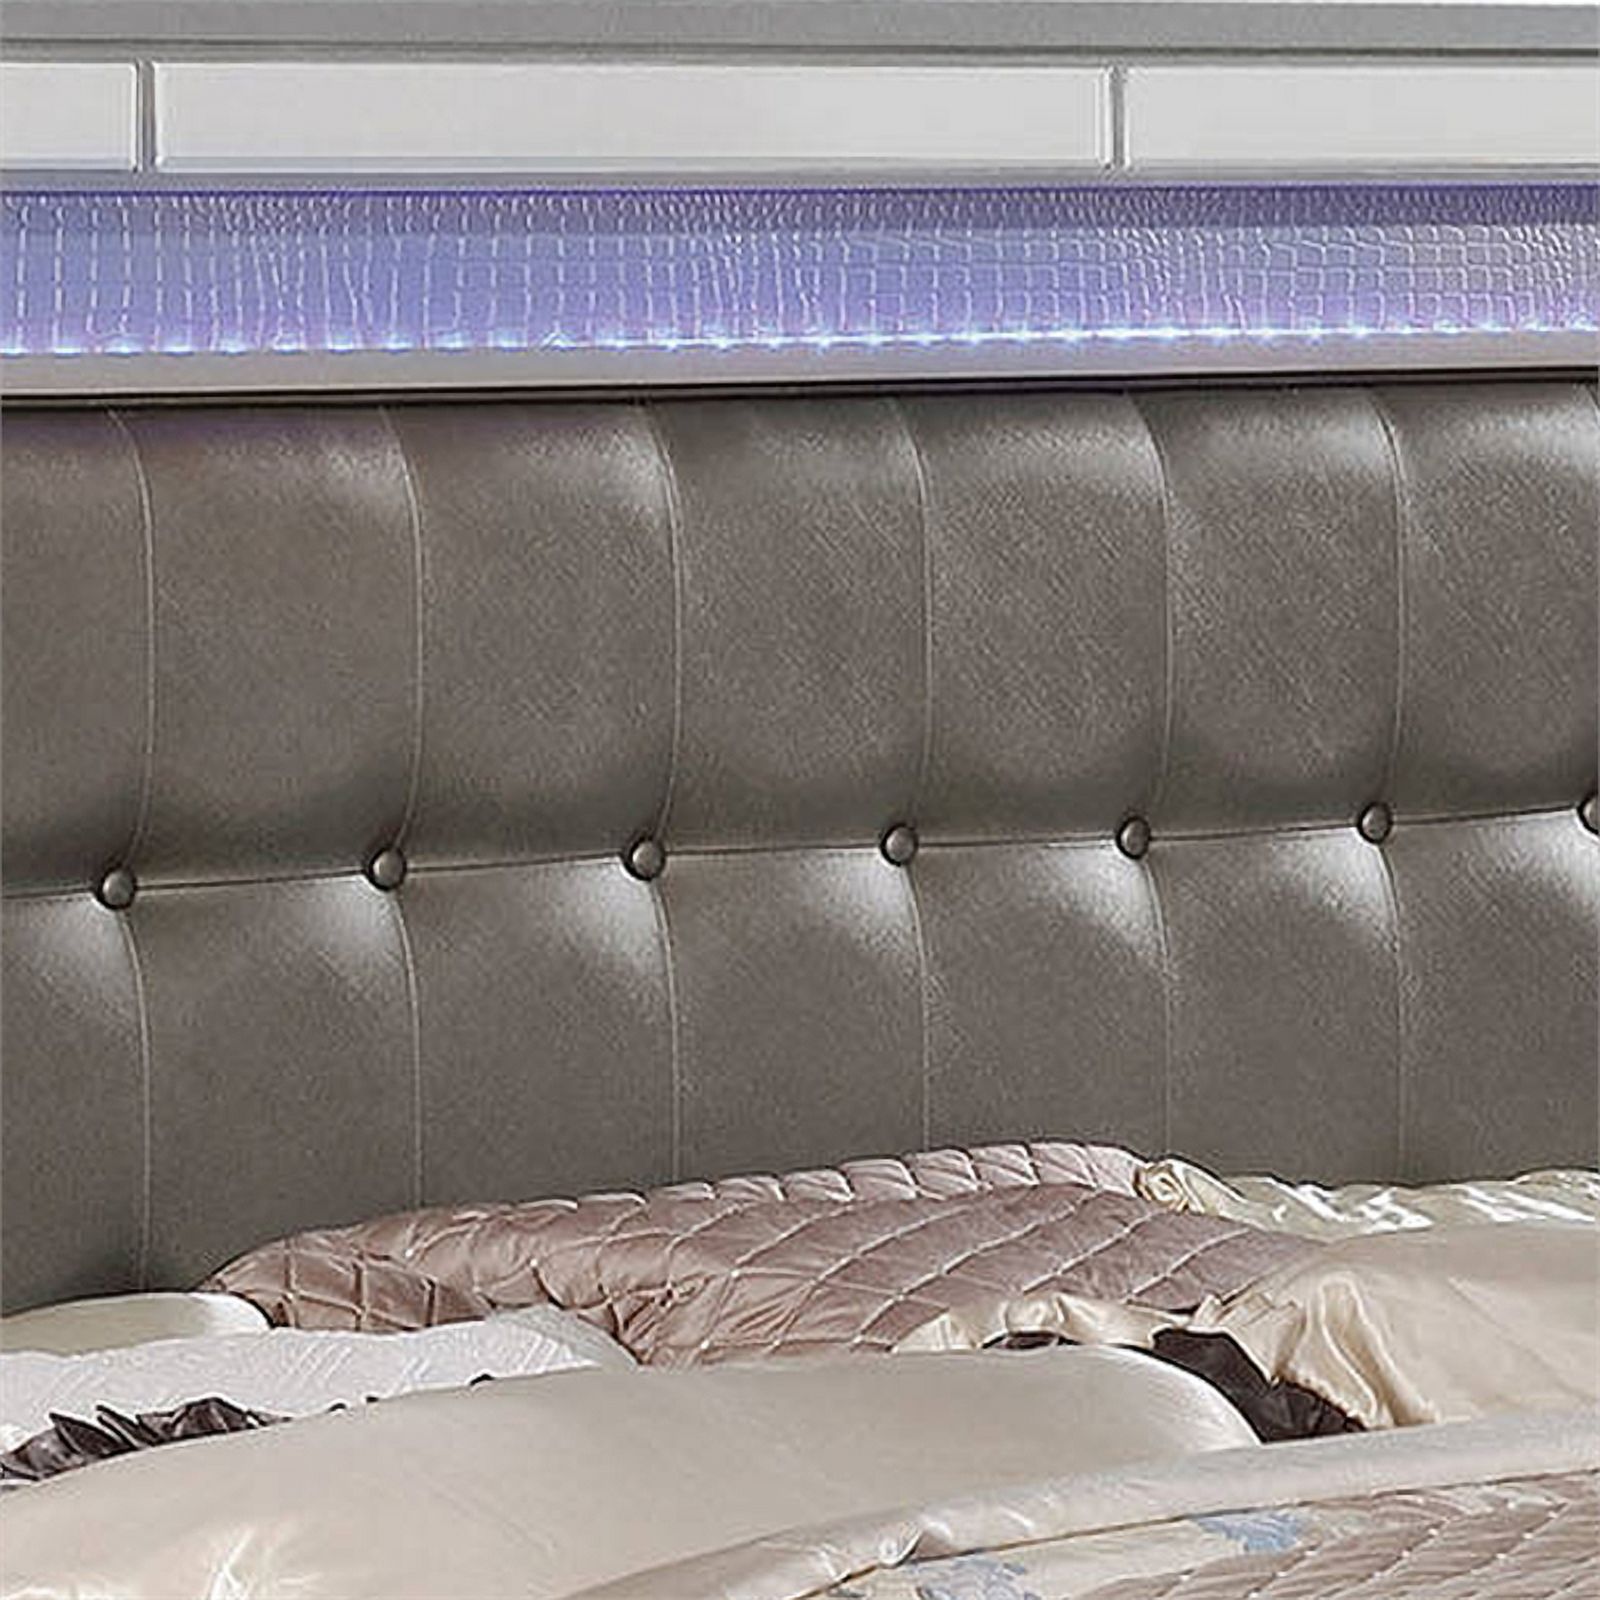 Contemporary Button Tufted California King Bed with Ornate Bun Feet,Silver - image 5 of 5